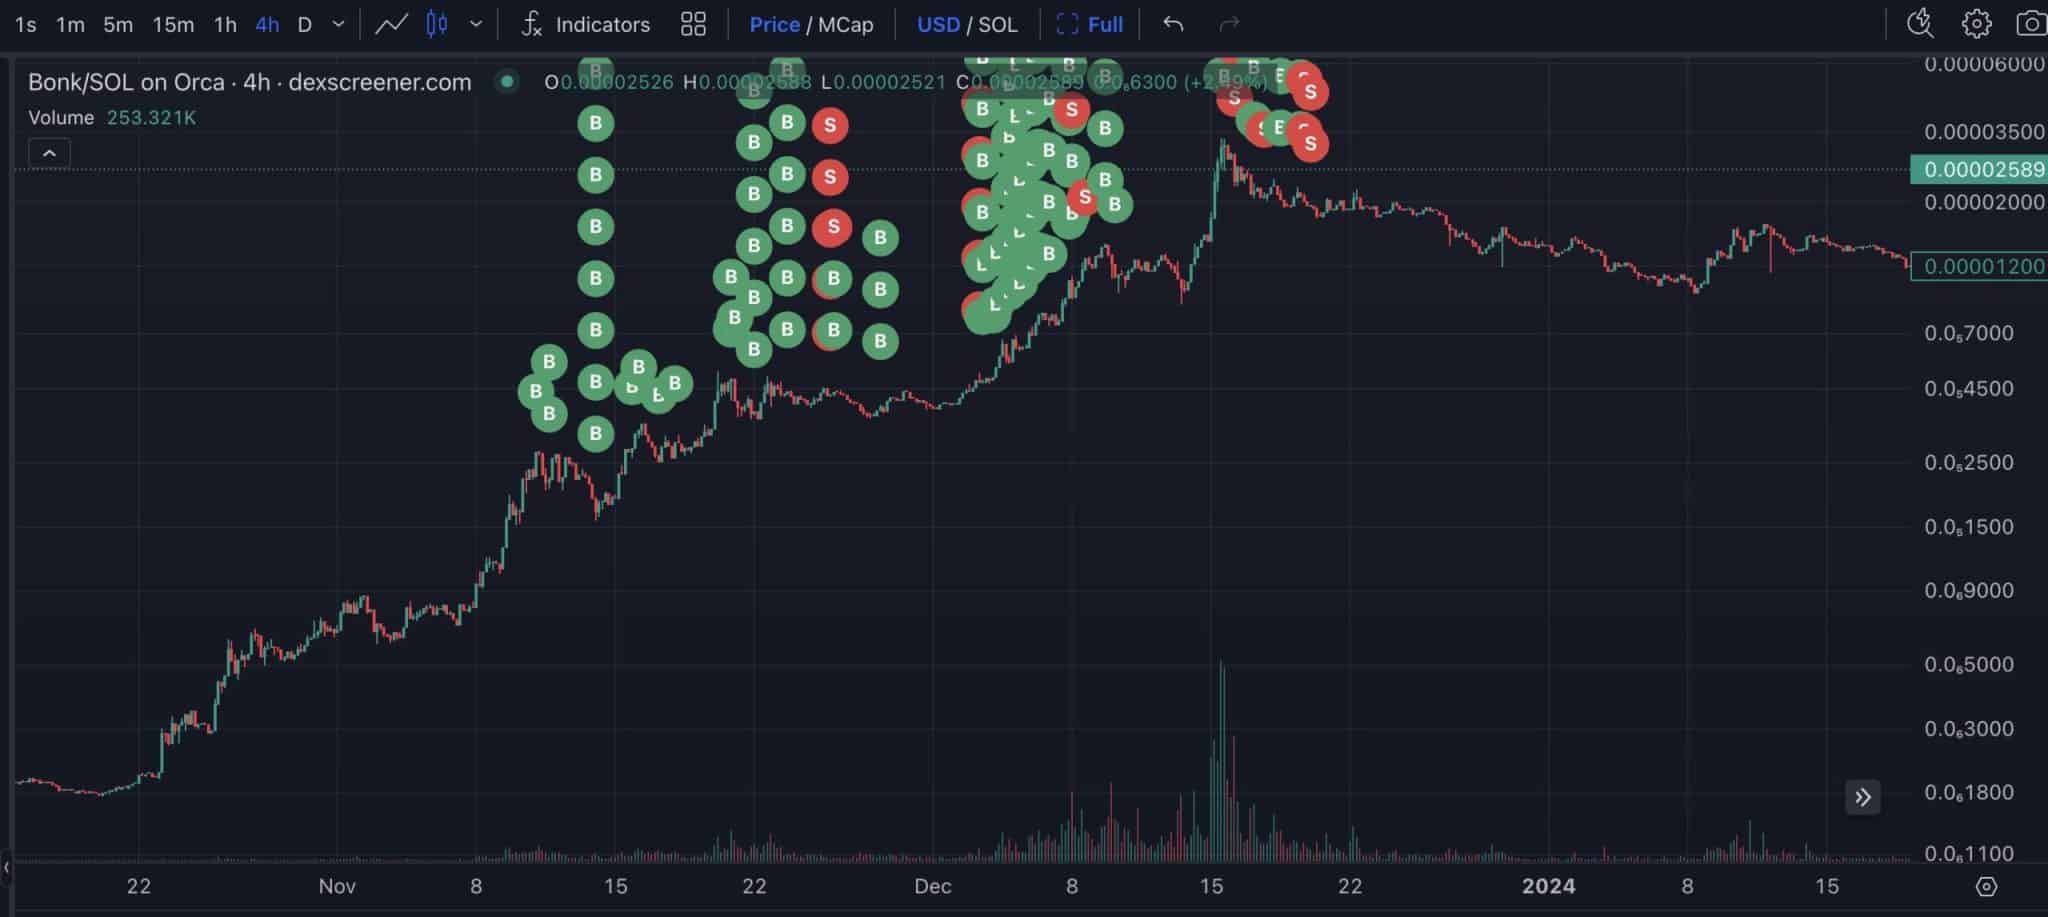 Meme coin trader cashing out millions in profits after buying WIF, BODEN, and BONK. On-chain data shows he's buying these two tokens